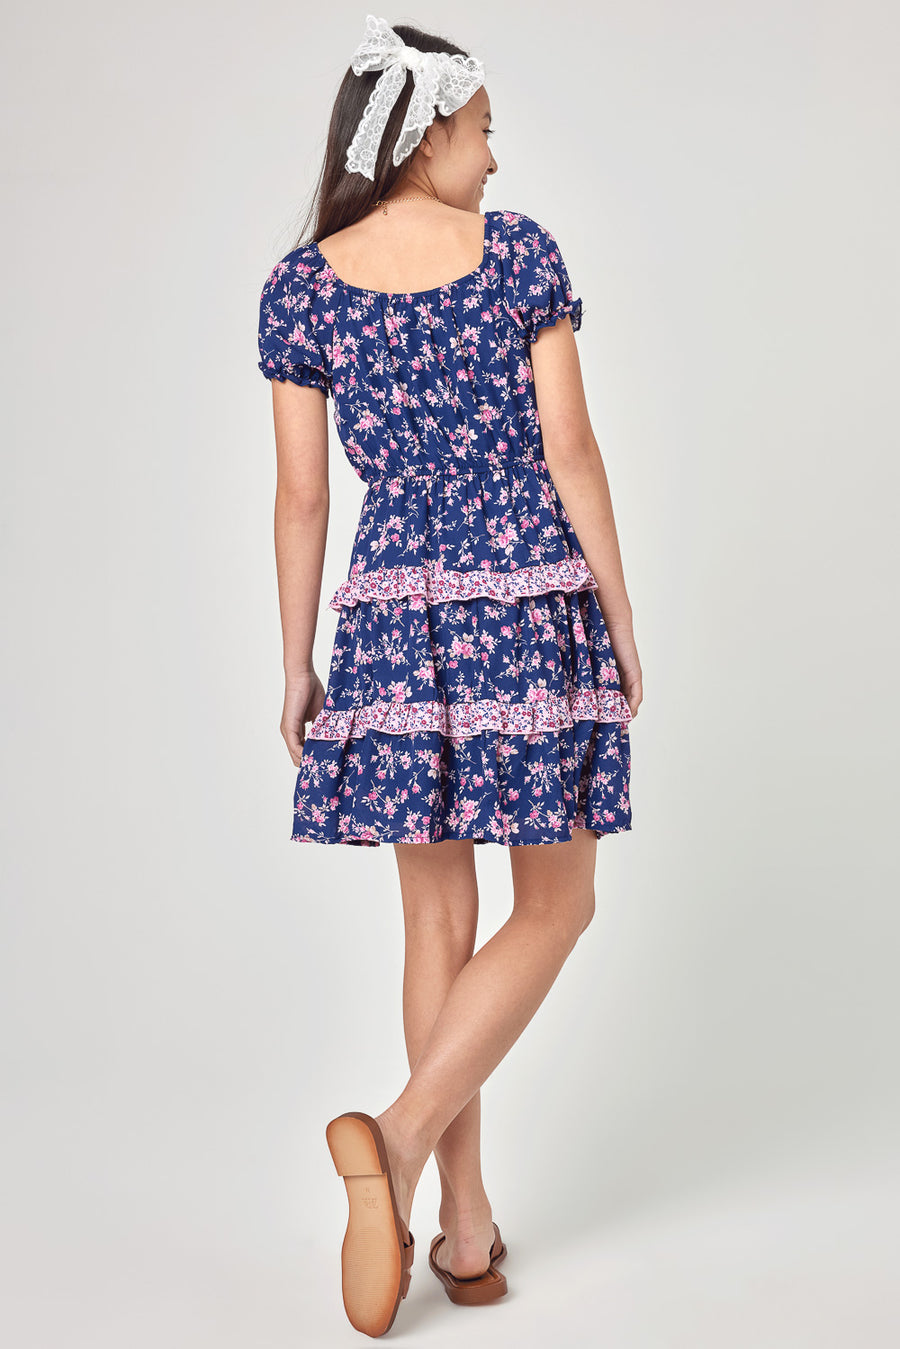 Kids Navy/Pink Floral Scrunched Nick SS Dress - Trixxi Clothing